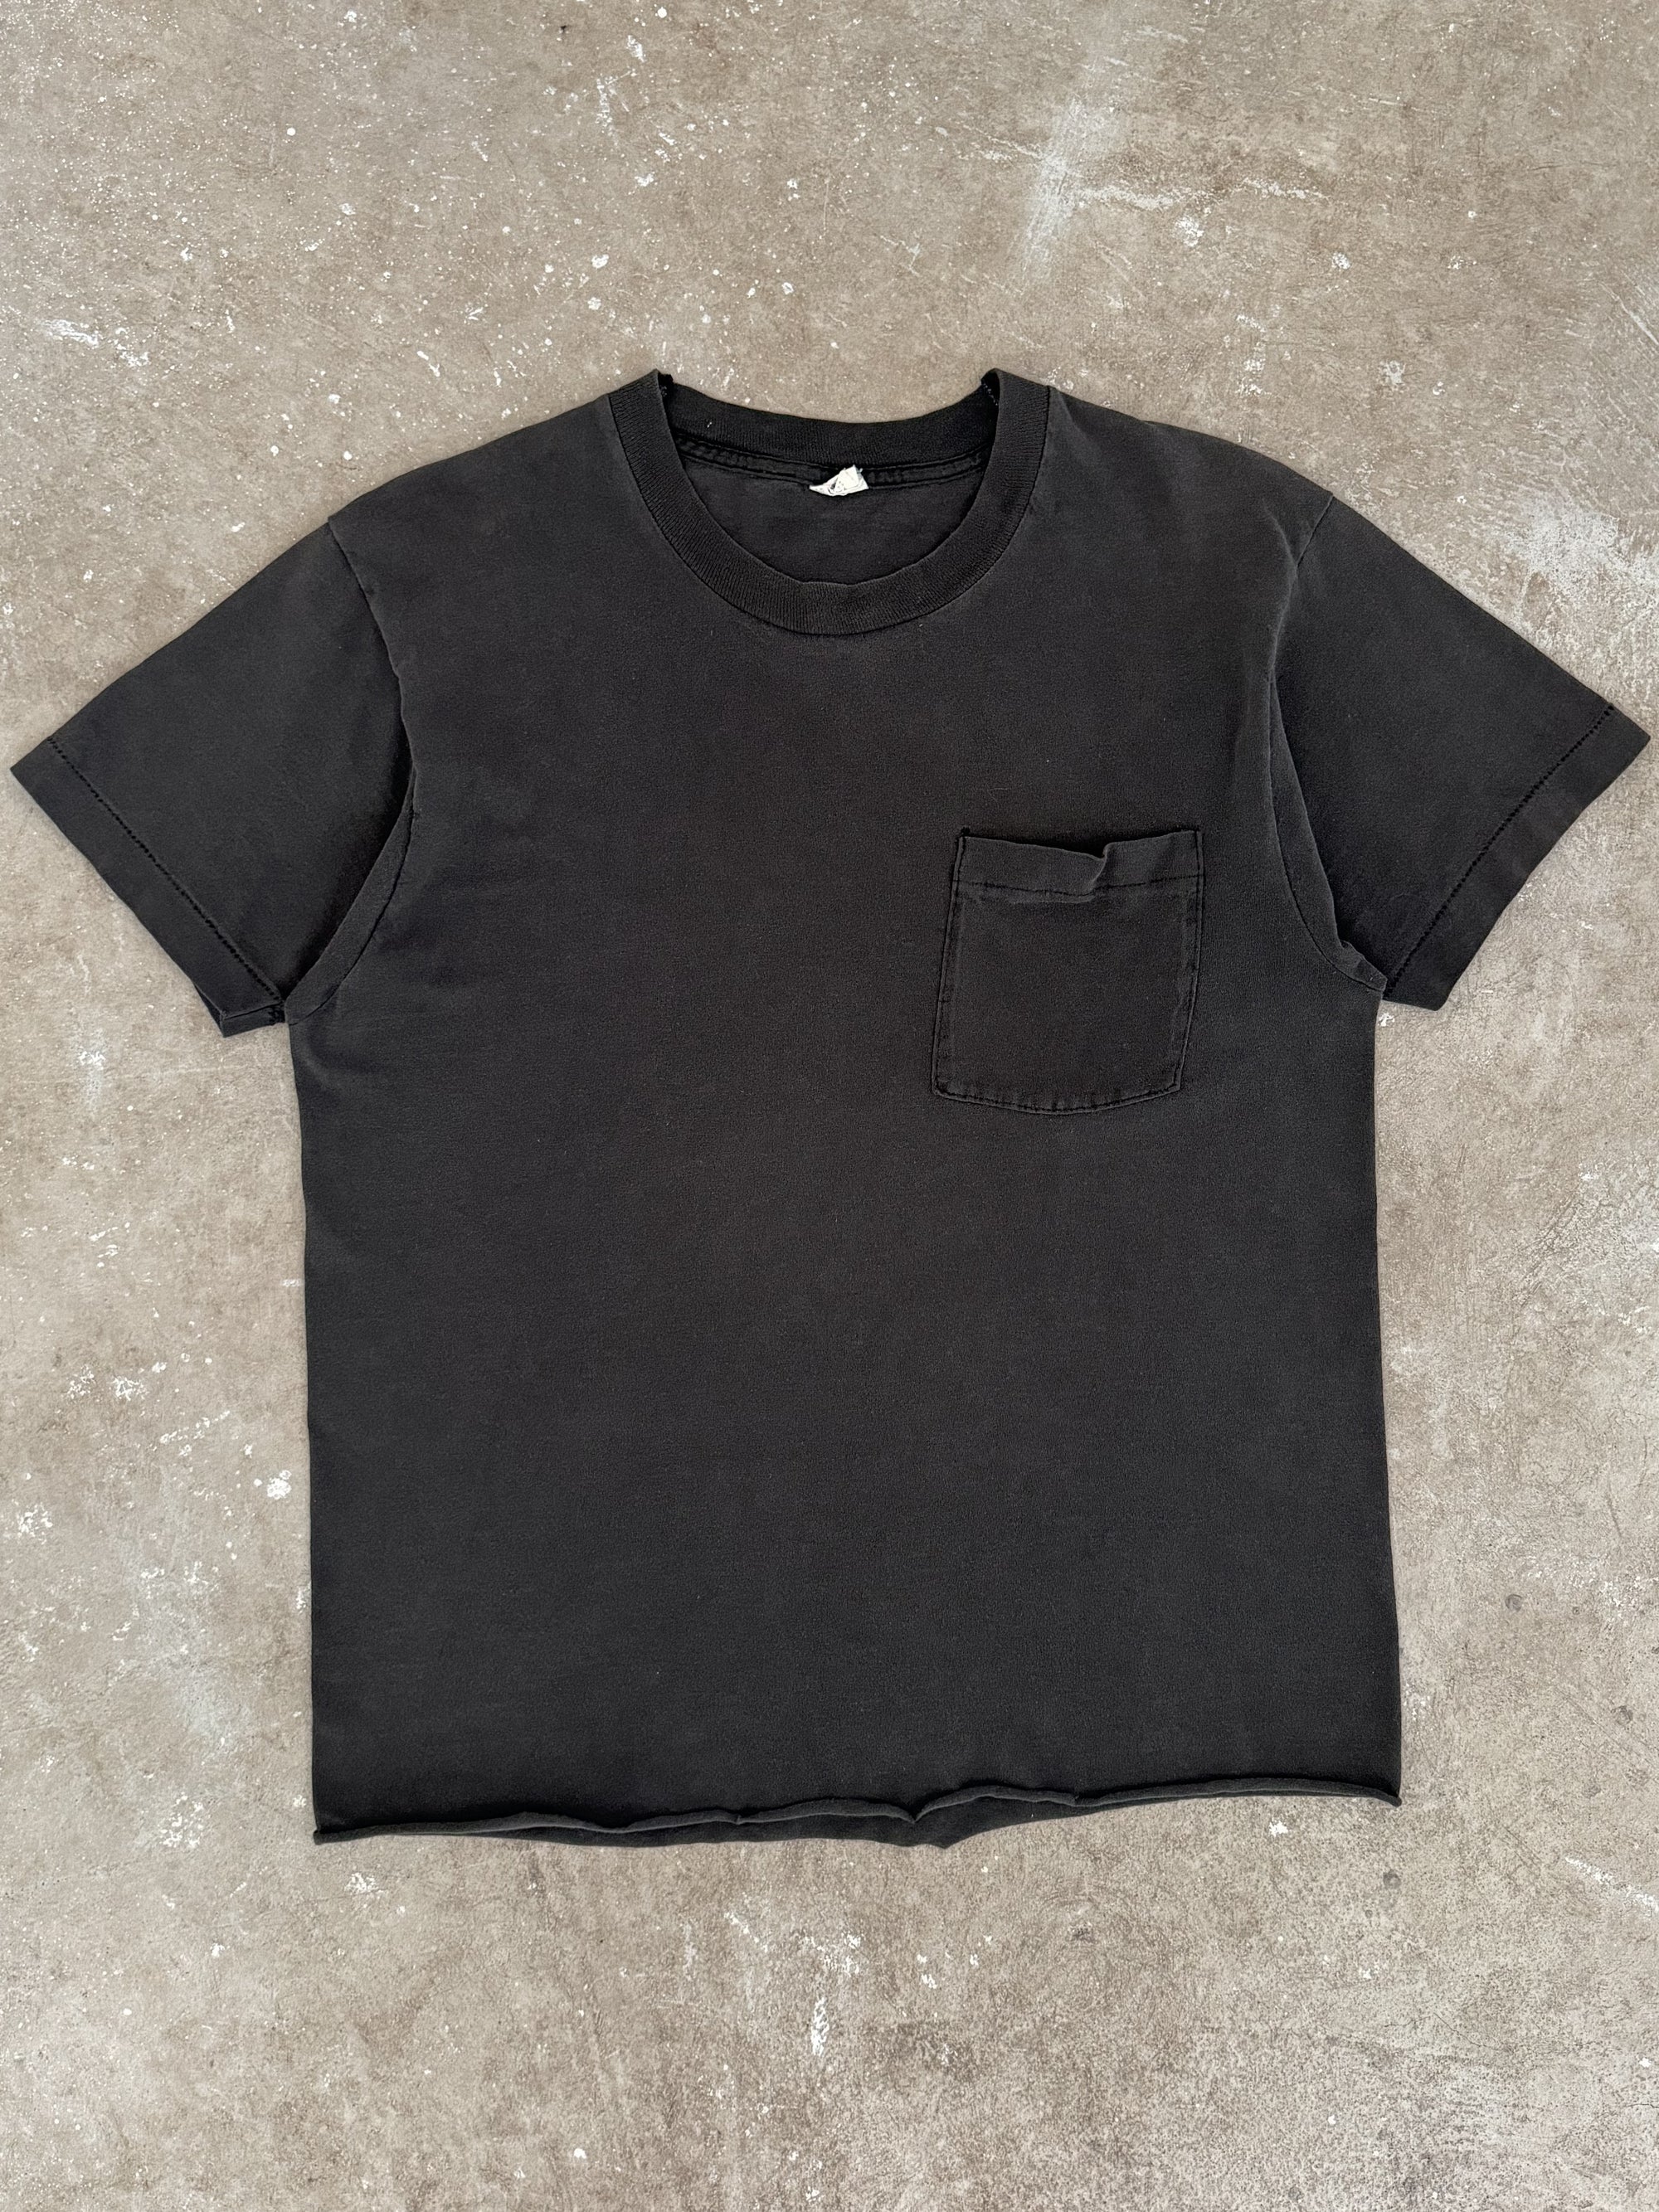 1980s Faded Black Cropped Pocket Tee (M)